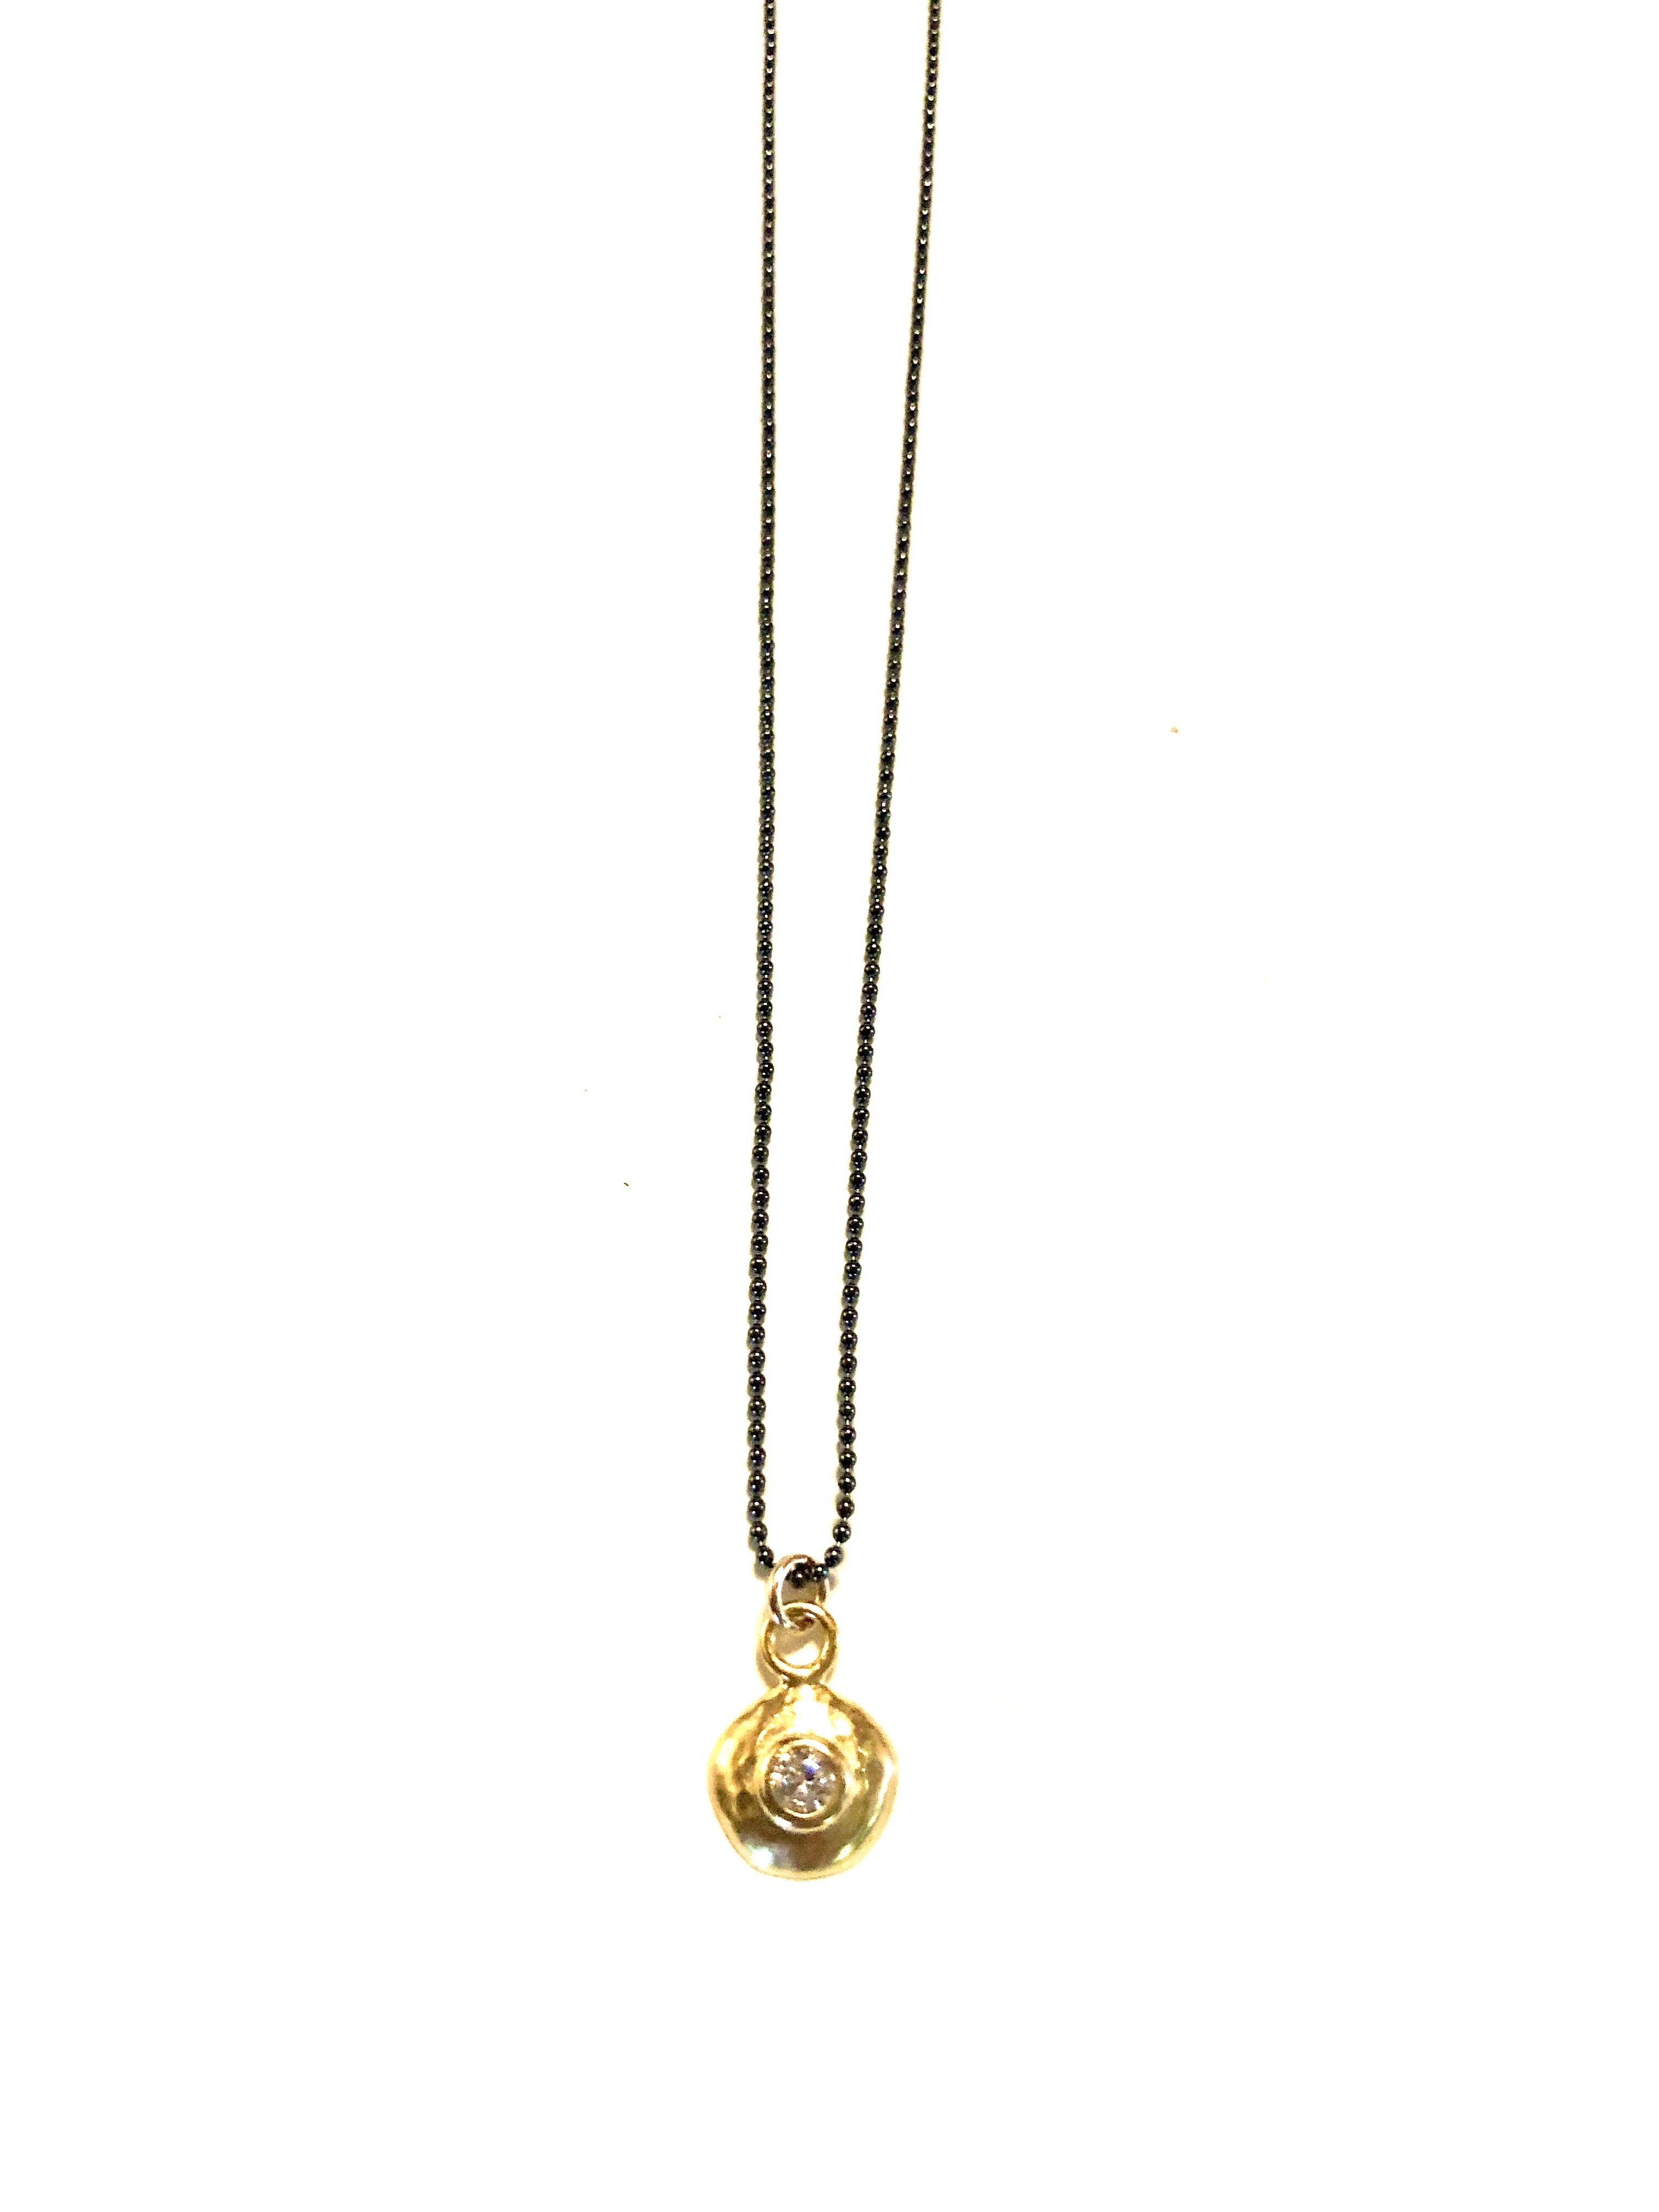 Charmer - necklace with sterling silver chain and pendant of vermeil and CZ